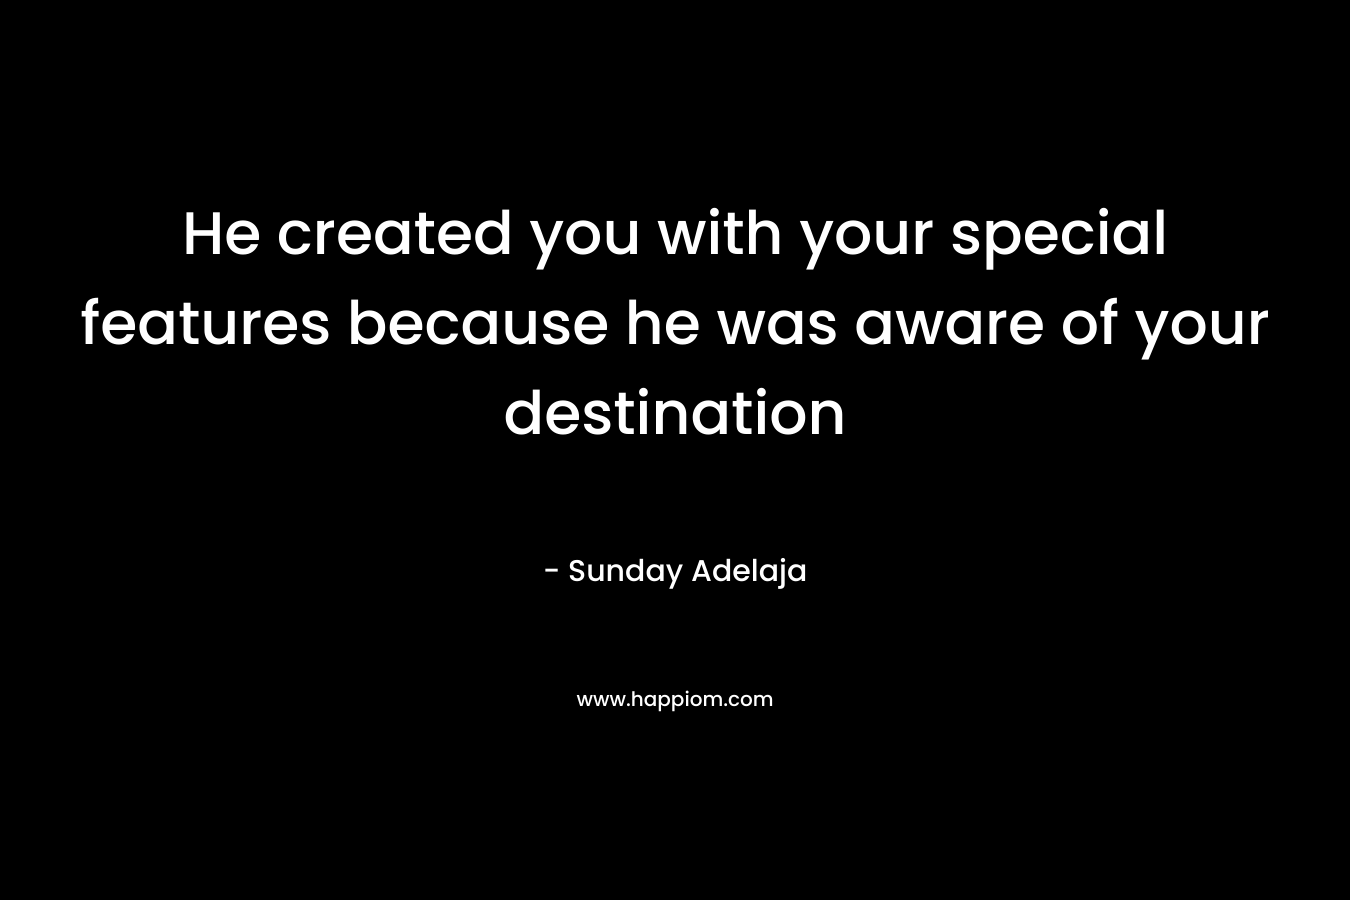 He created you with your special features because he was aware of your destination